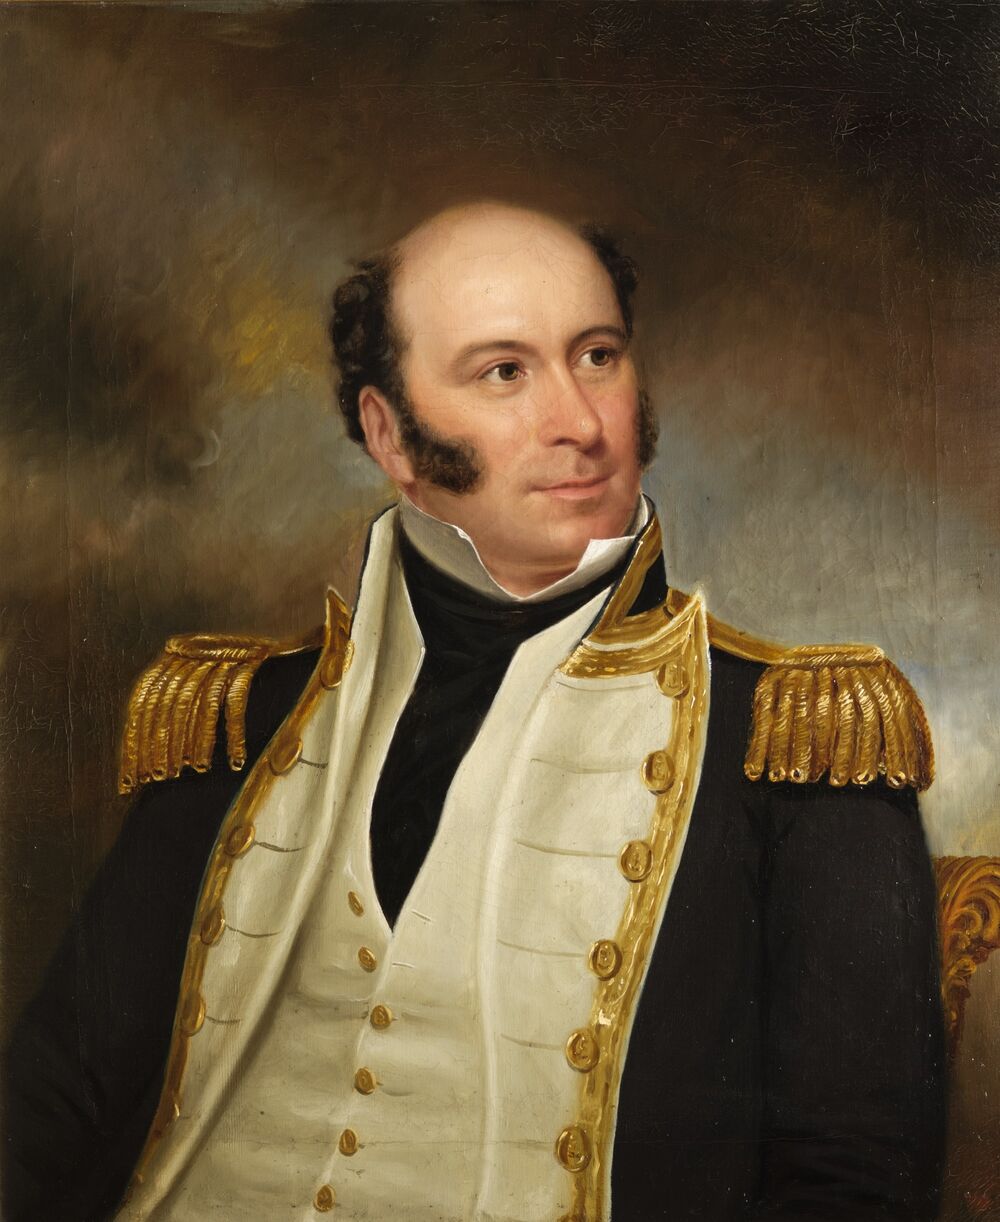 A half portrait of a middle-aged man in naval uniform. He has dark sideburns although is bald on top. He wears a navy jacket with gold trimmings, and a white waistcoat underneath.